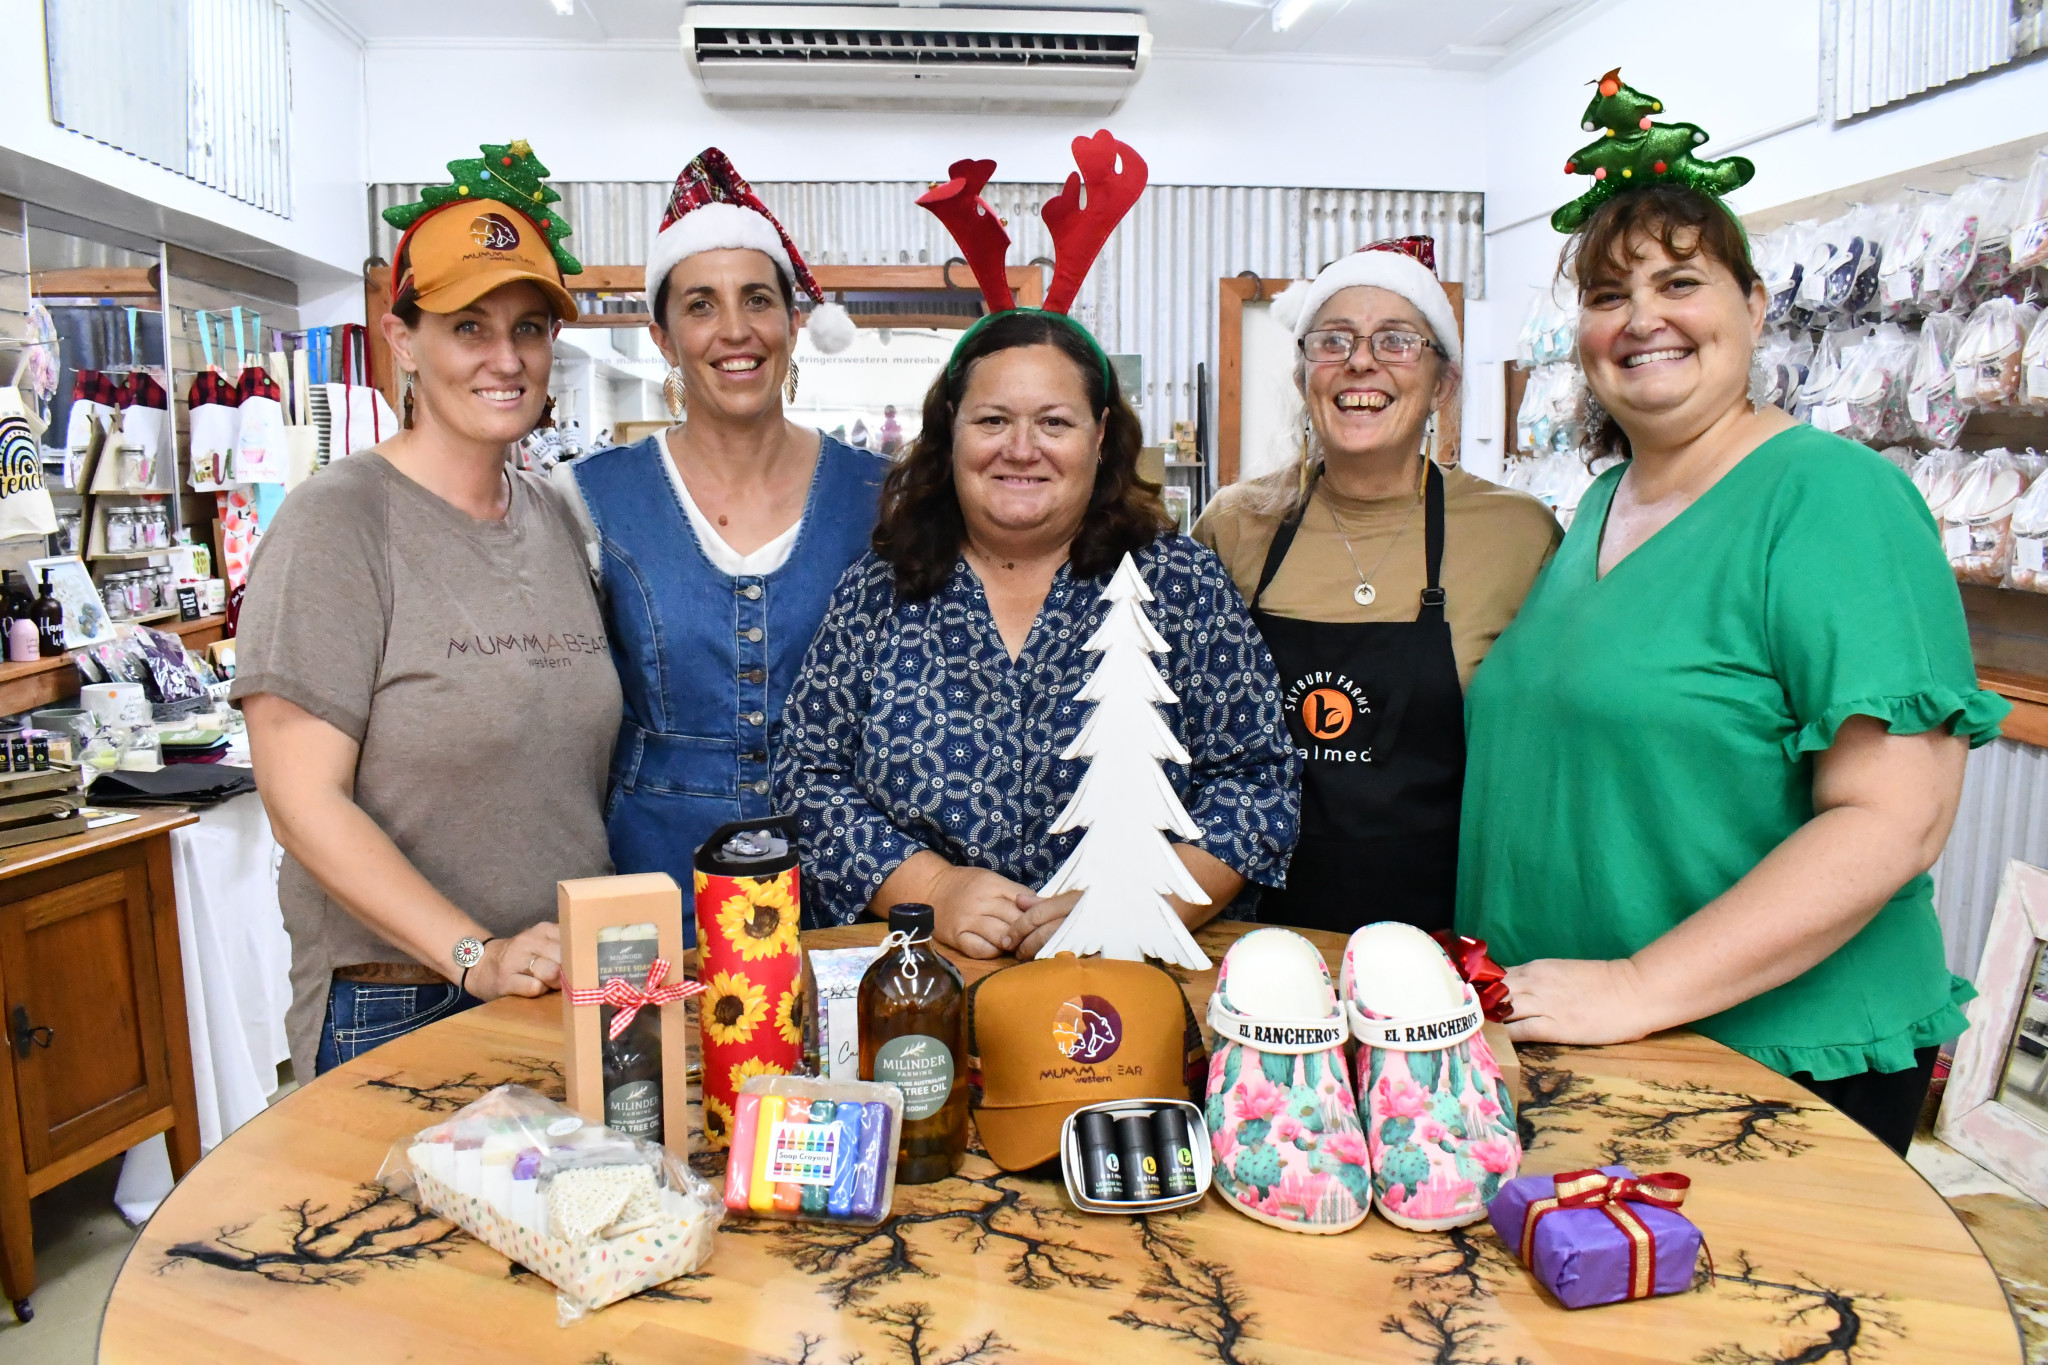 OPEN: (from left) Jes Panov of Mummabear, Michelle Milicevic of Milinder Farming, Tammy Sivyer of El Ranchero’s, Melissa Bond of B balmed, and Ornella De Rosa of SOM Style are excited to open up a pop-up shop for Christmas.